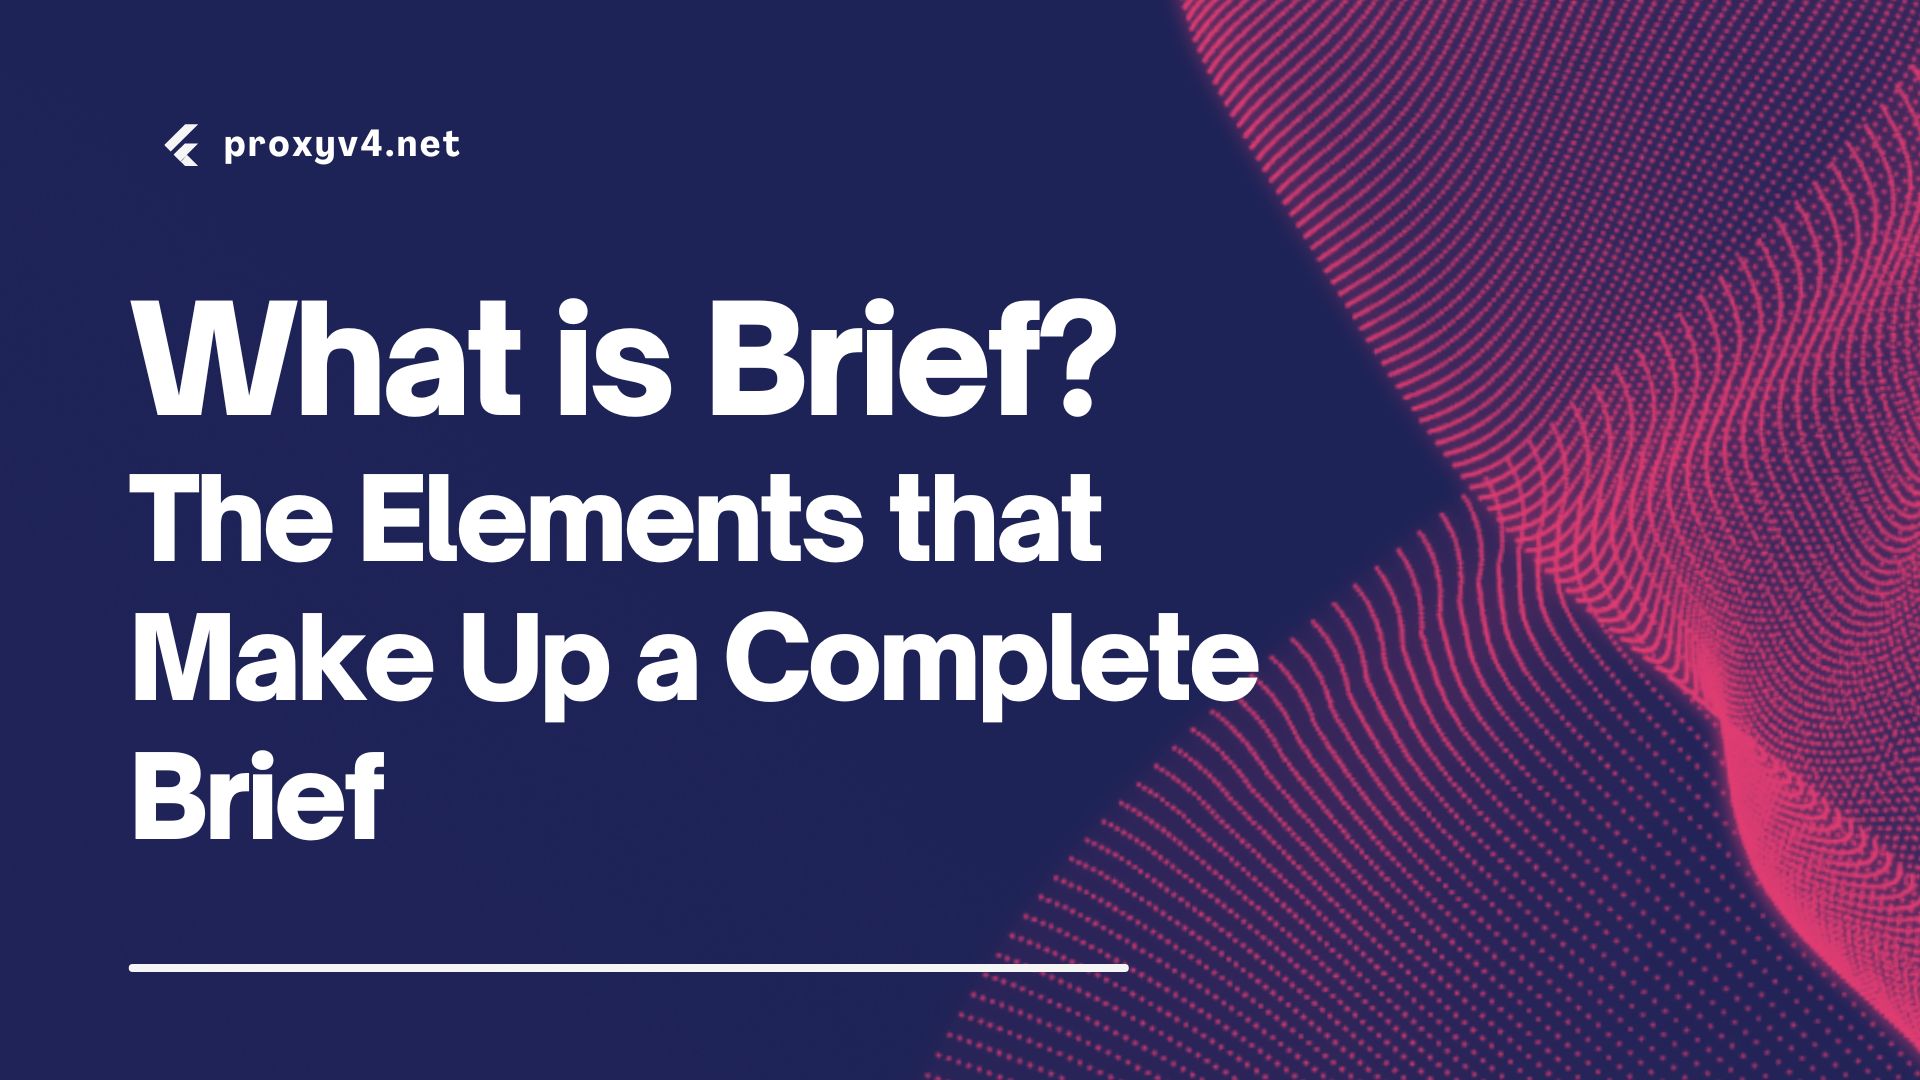 What is Brief? The Elements that Make Up a Complete Brief